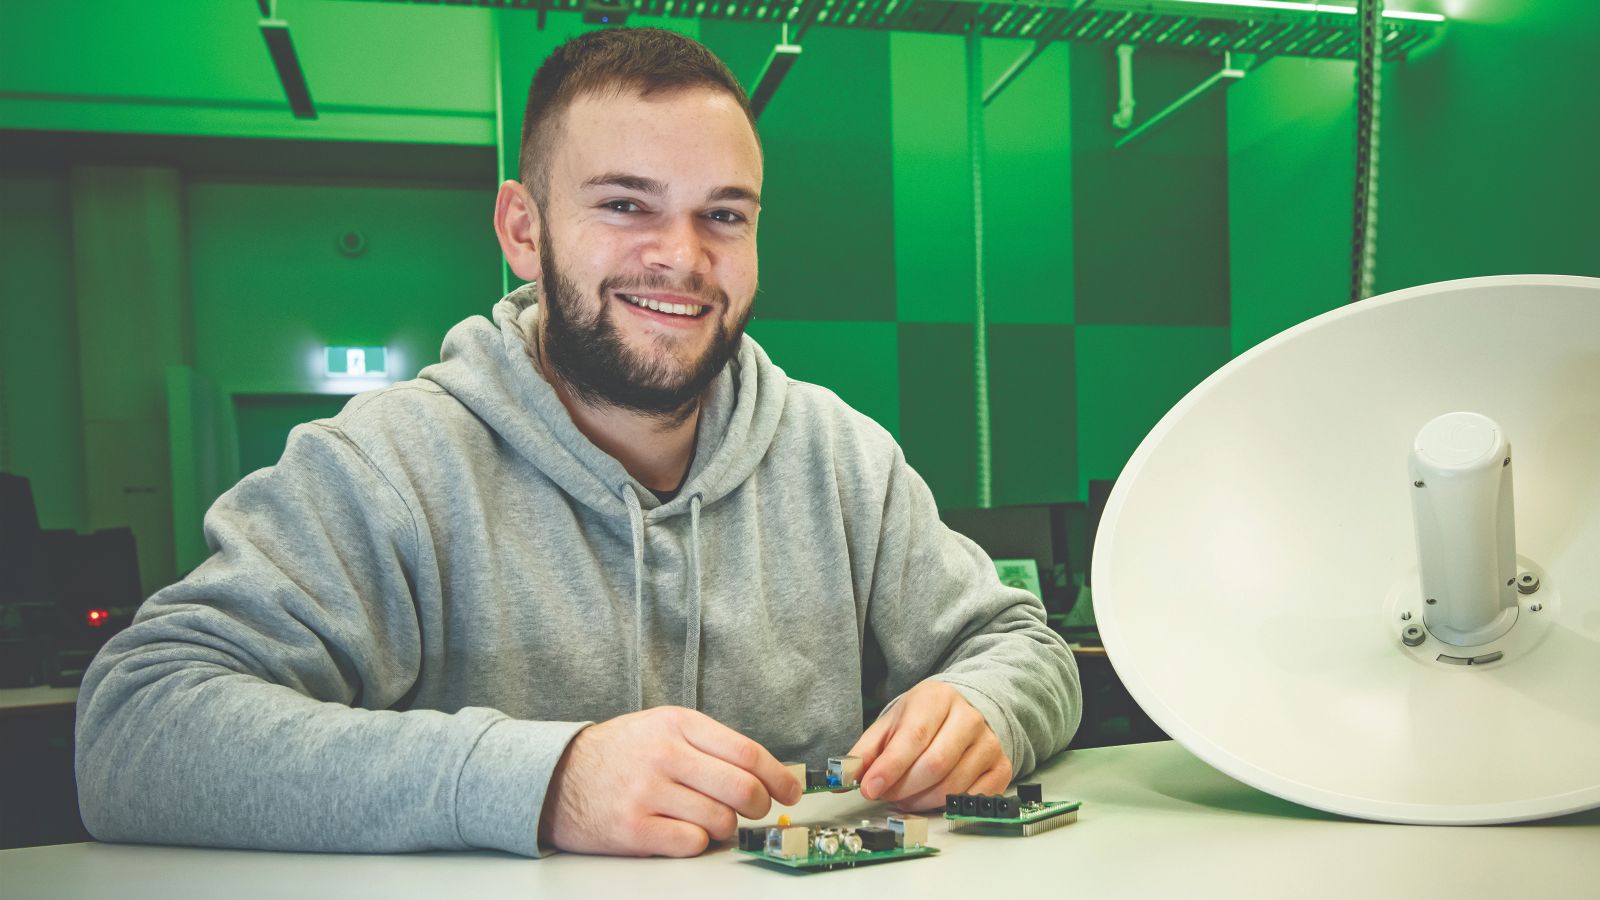 Duncan looks into the camera. He is holding a circuit board. The room is lit up in a green hue.